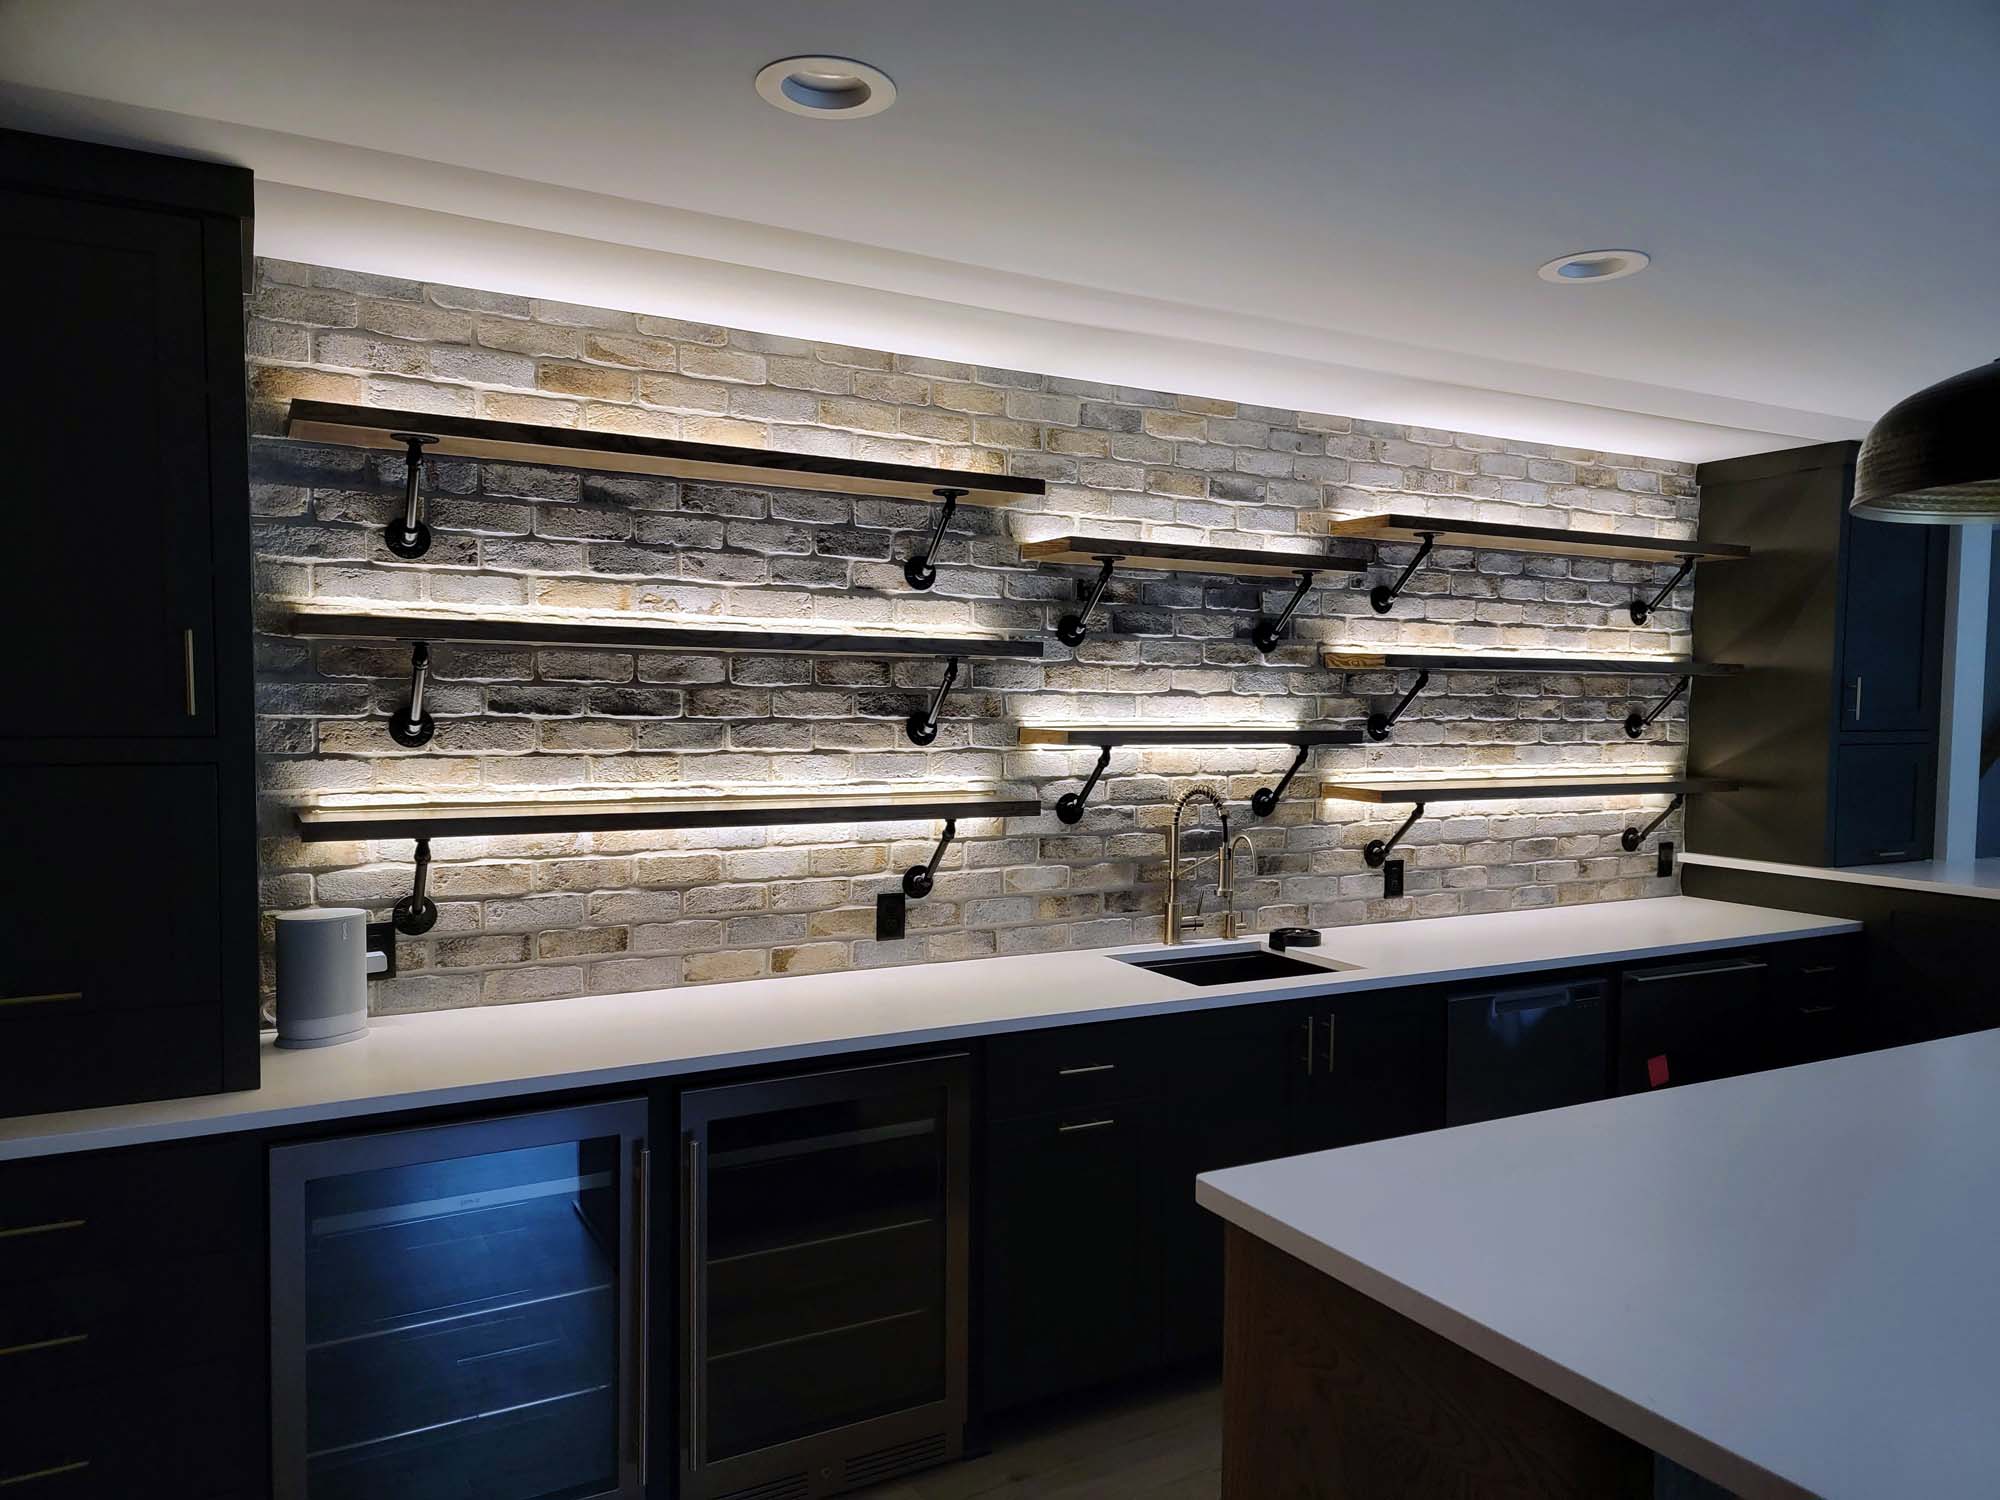 Bar shelving with LED accent lighting